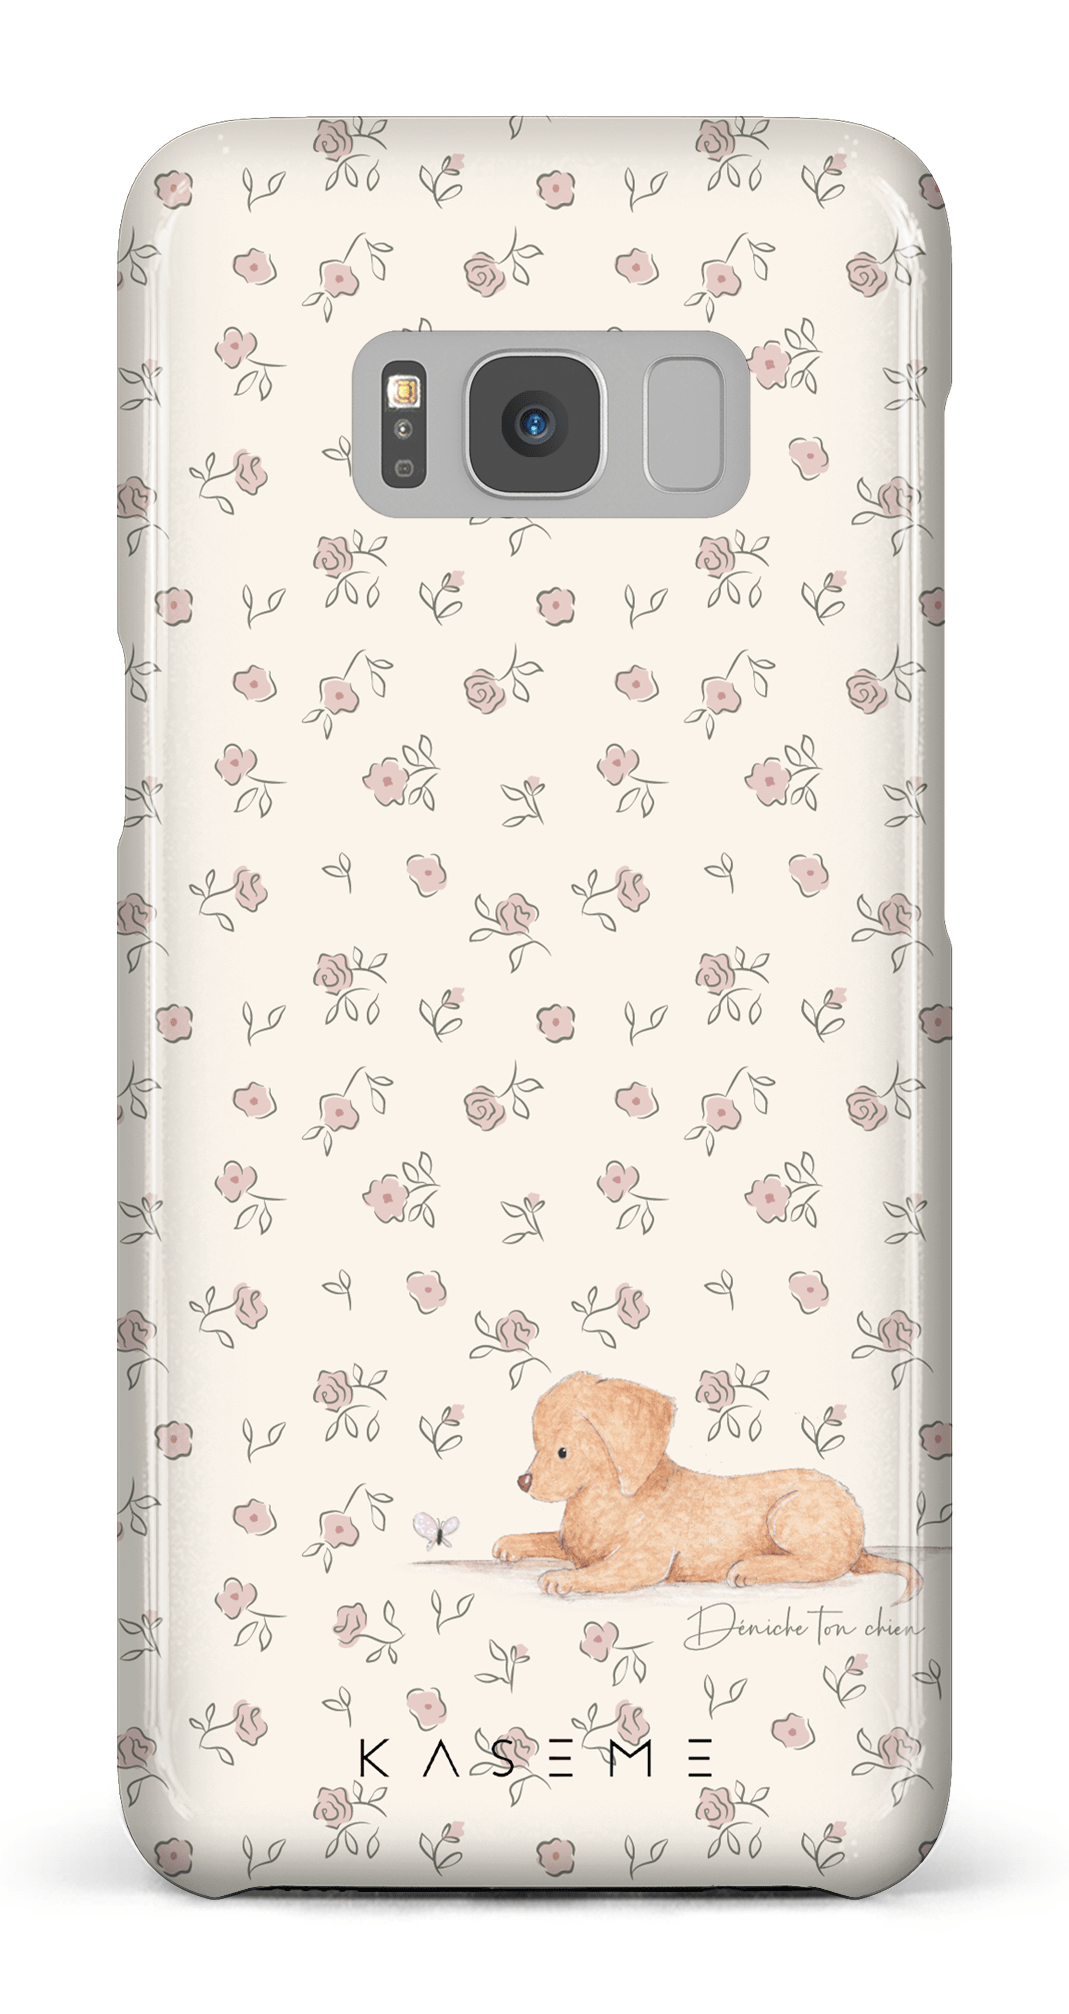 Fur-Ever A Dog Lover Pink by Déniche Ton Chien - Galaxy S8